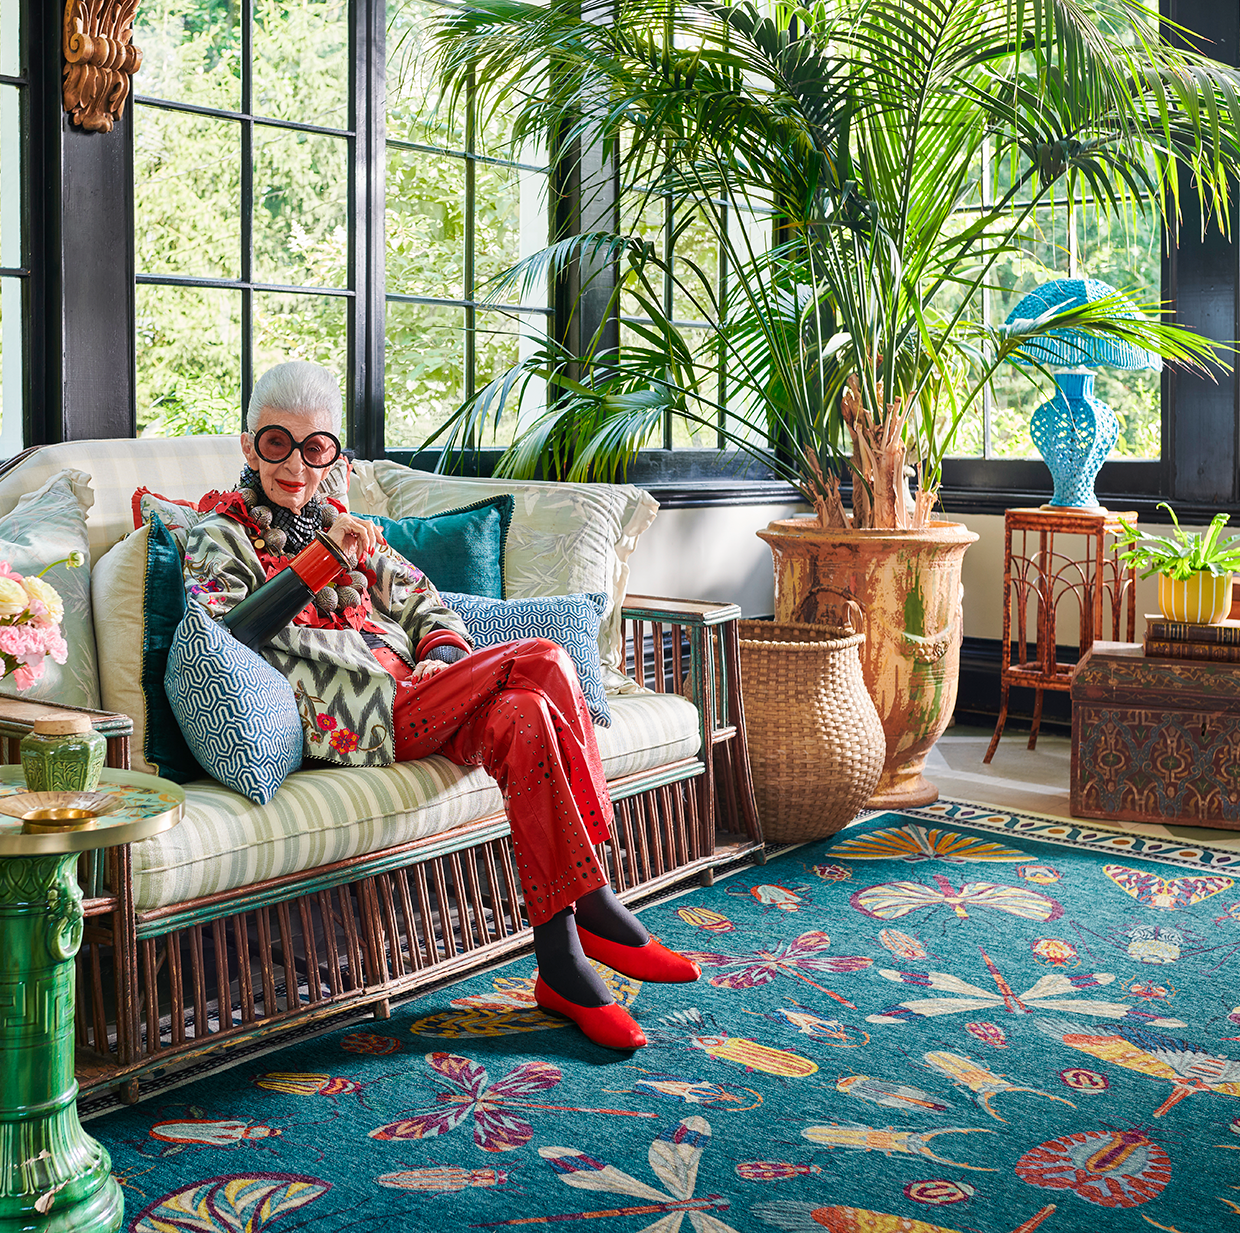 We're Totally Obsessed with These Colorful (And Machine-Washable!) Rugs from Iris Apfel and Ruggable